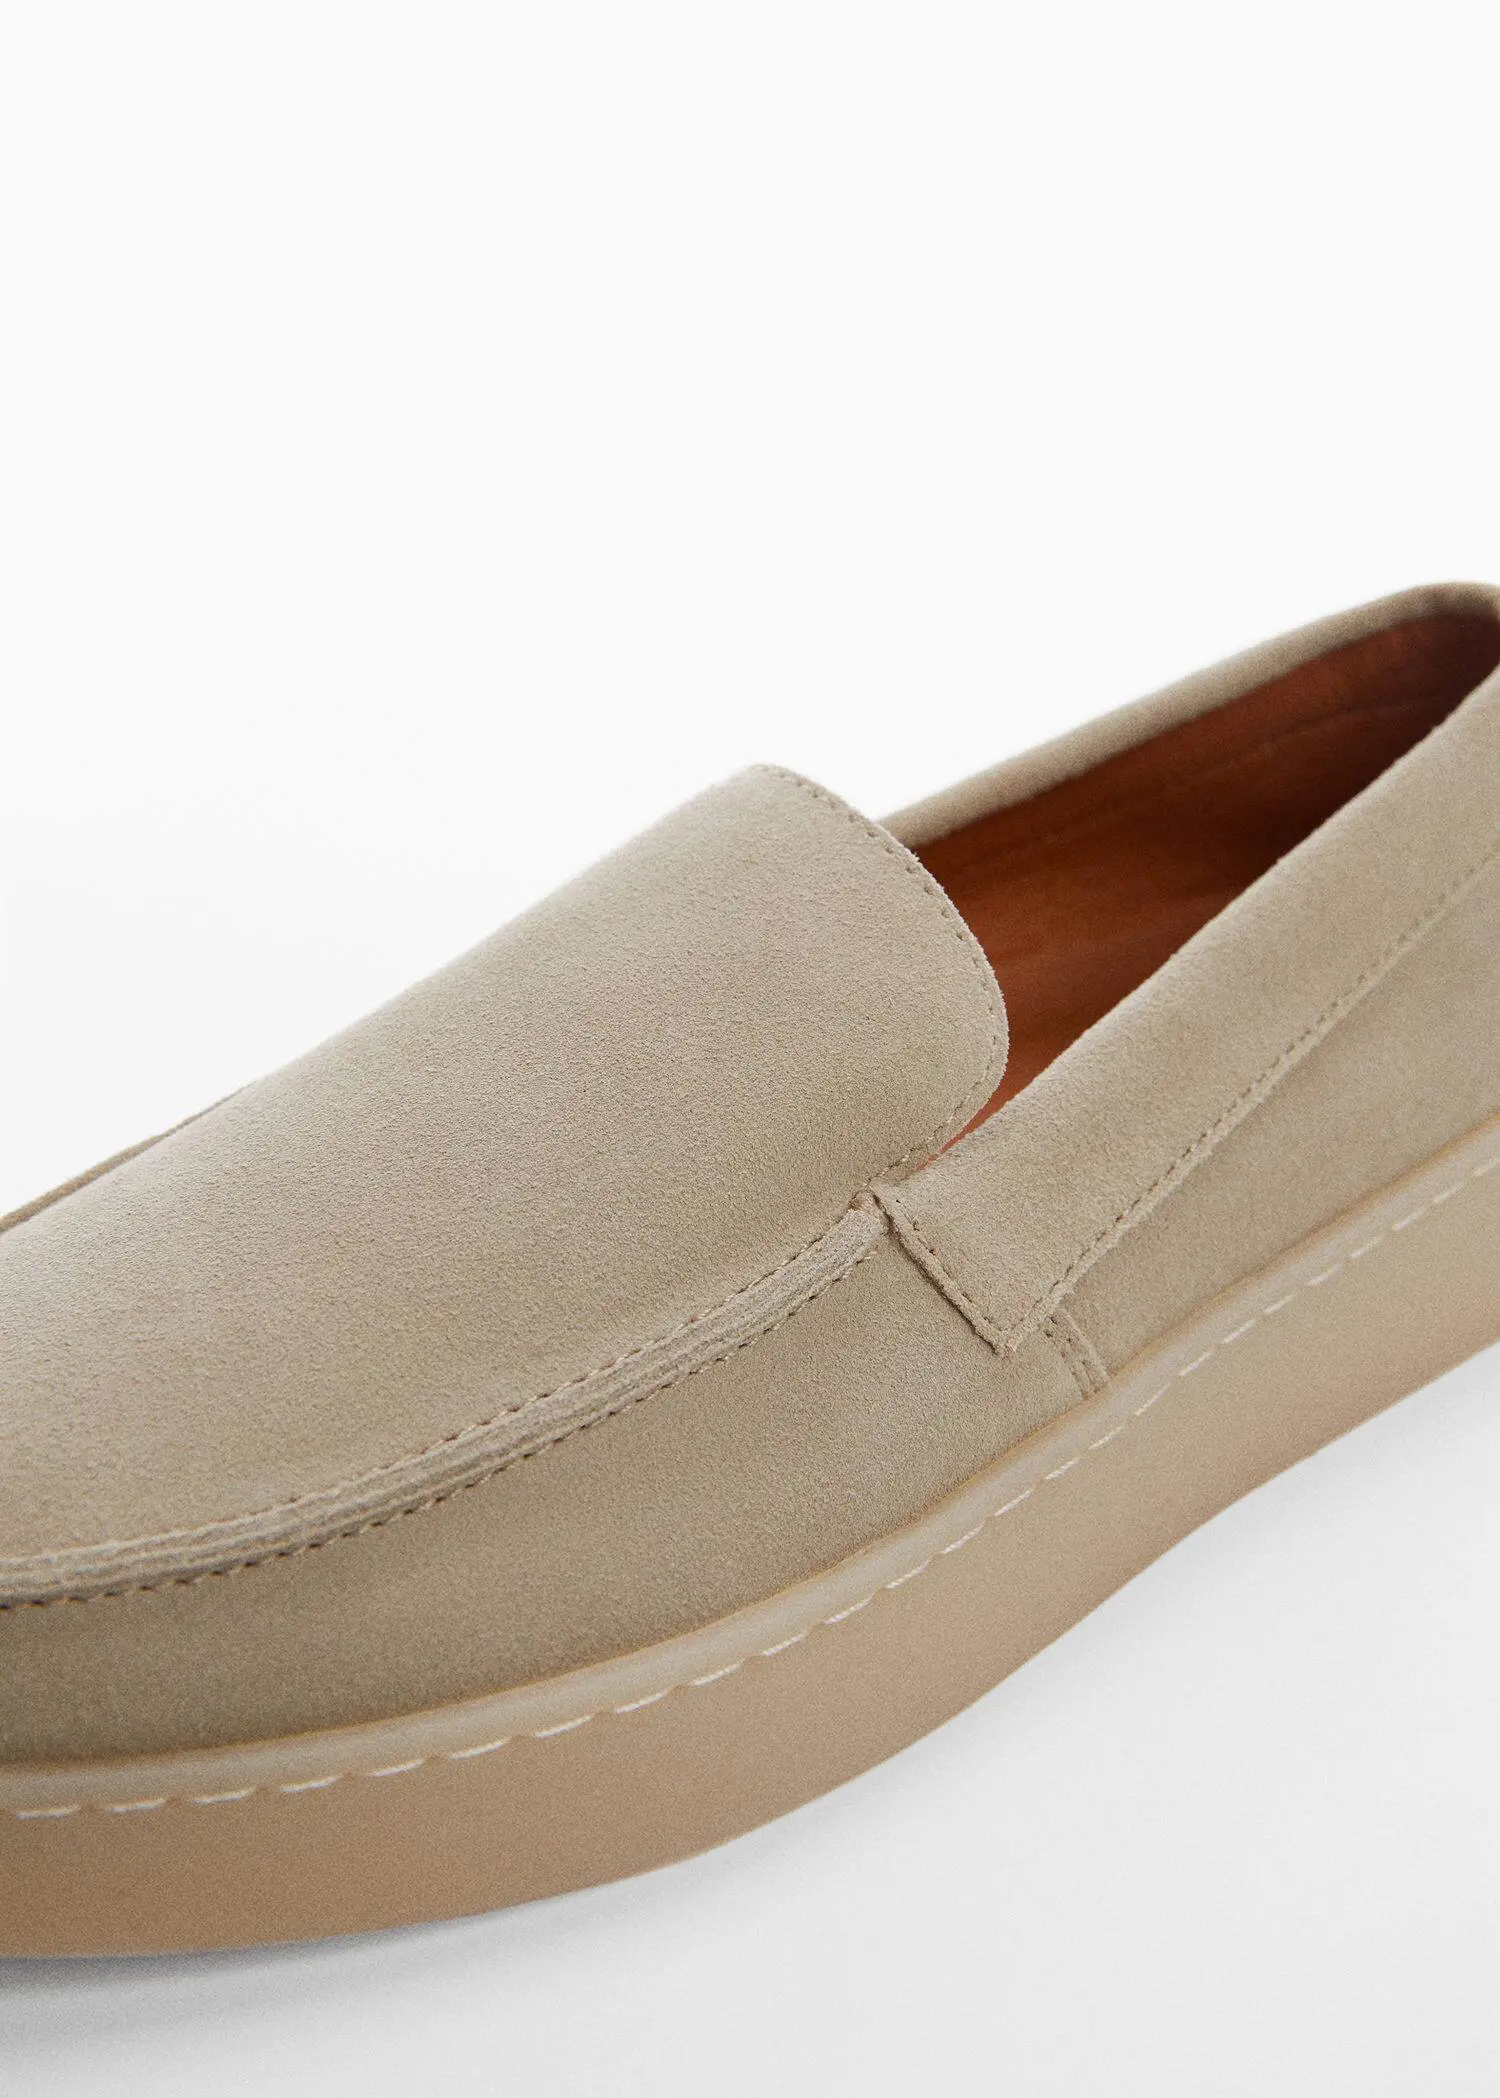 Mango Split leather shoes. a close up view of a pair of beige shoes. 